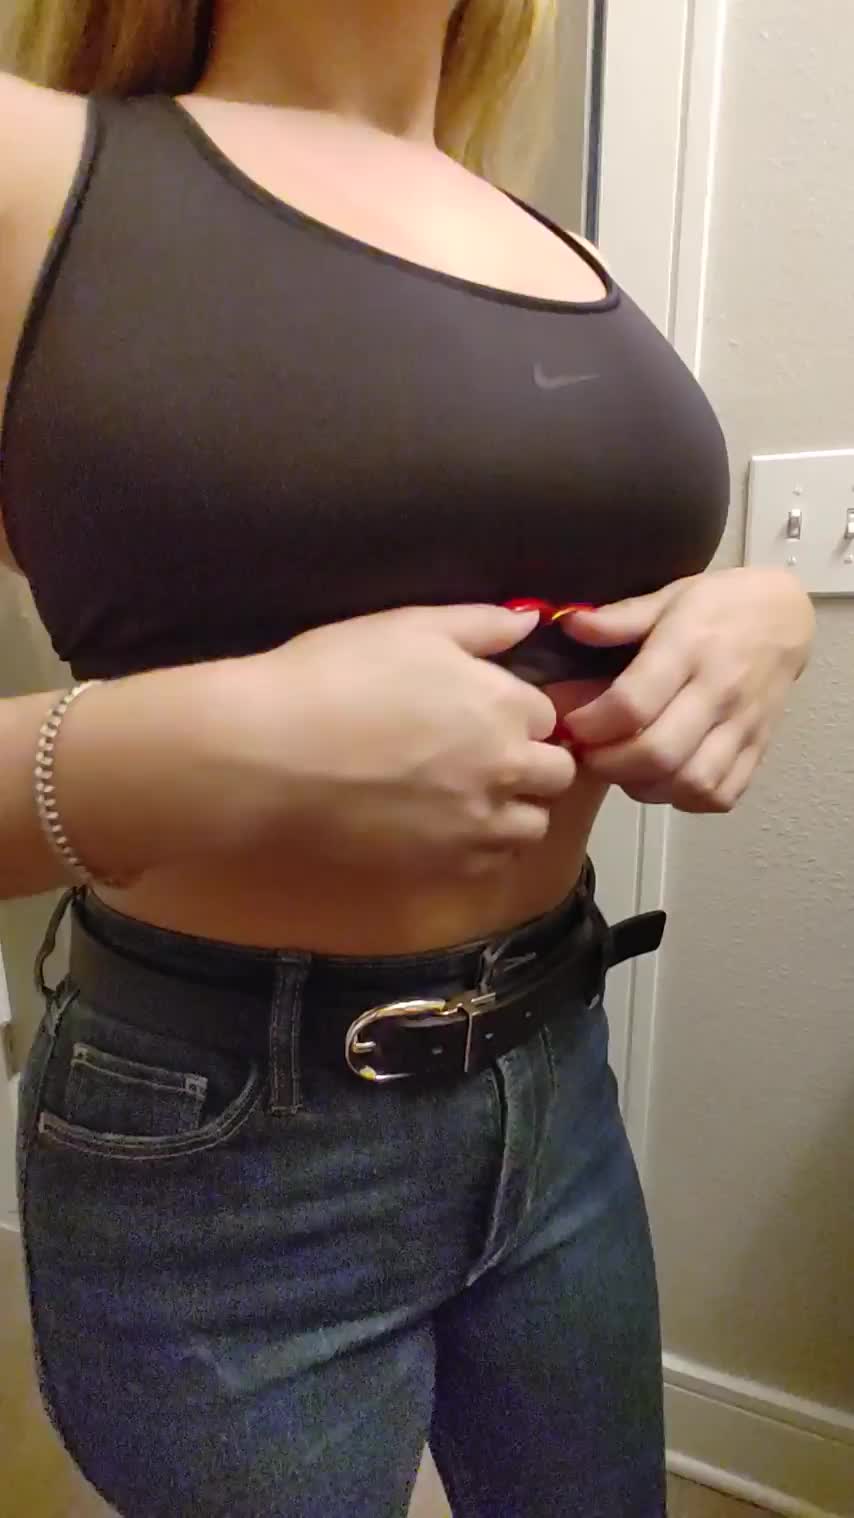 Sports bras really don't do these justice! : video clip